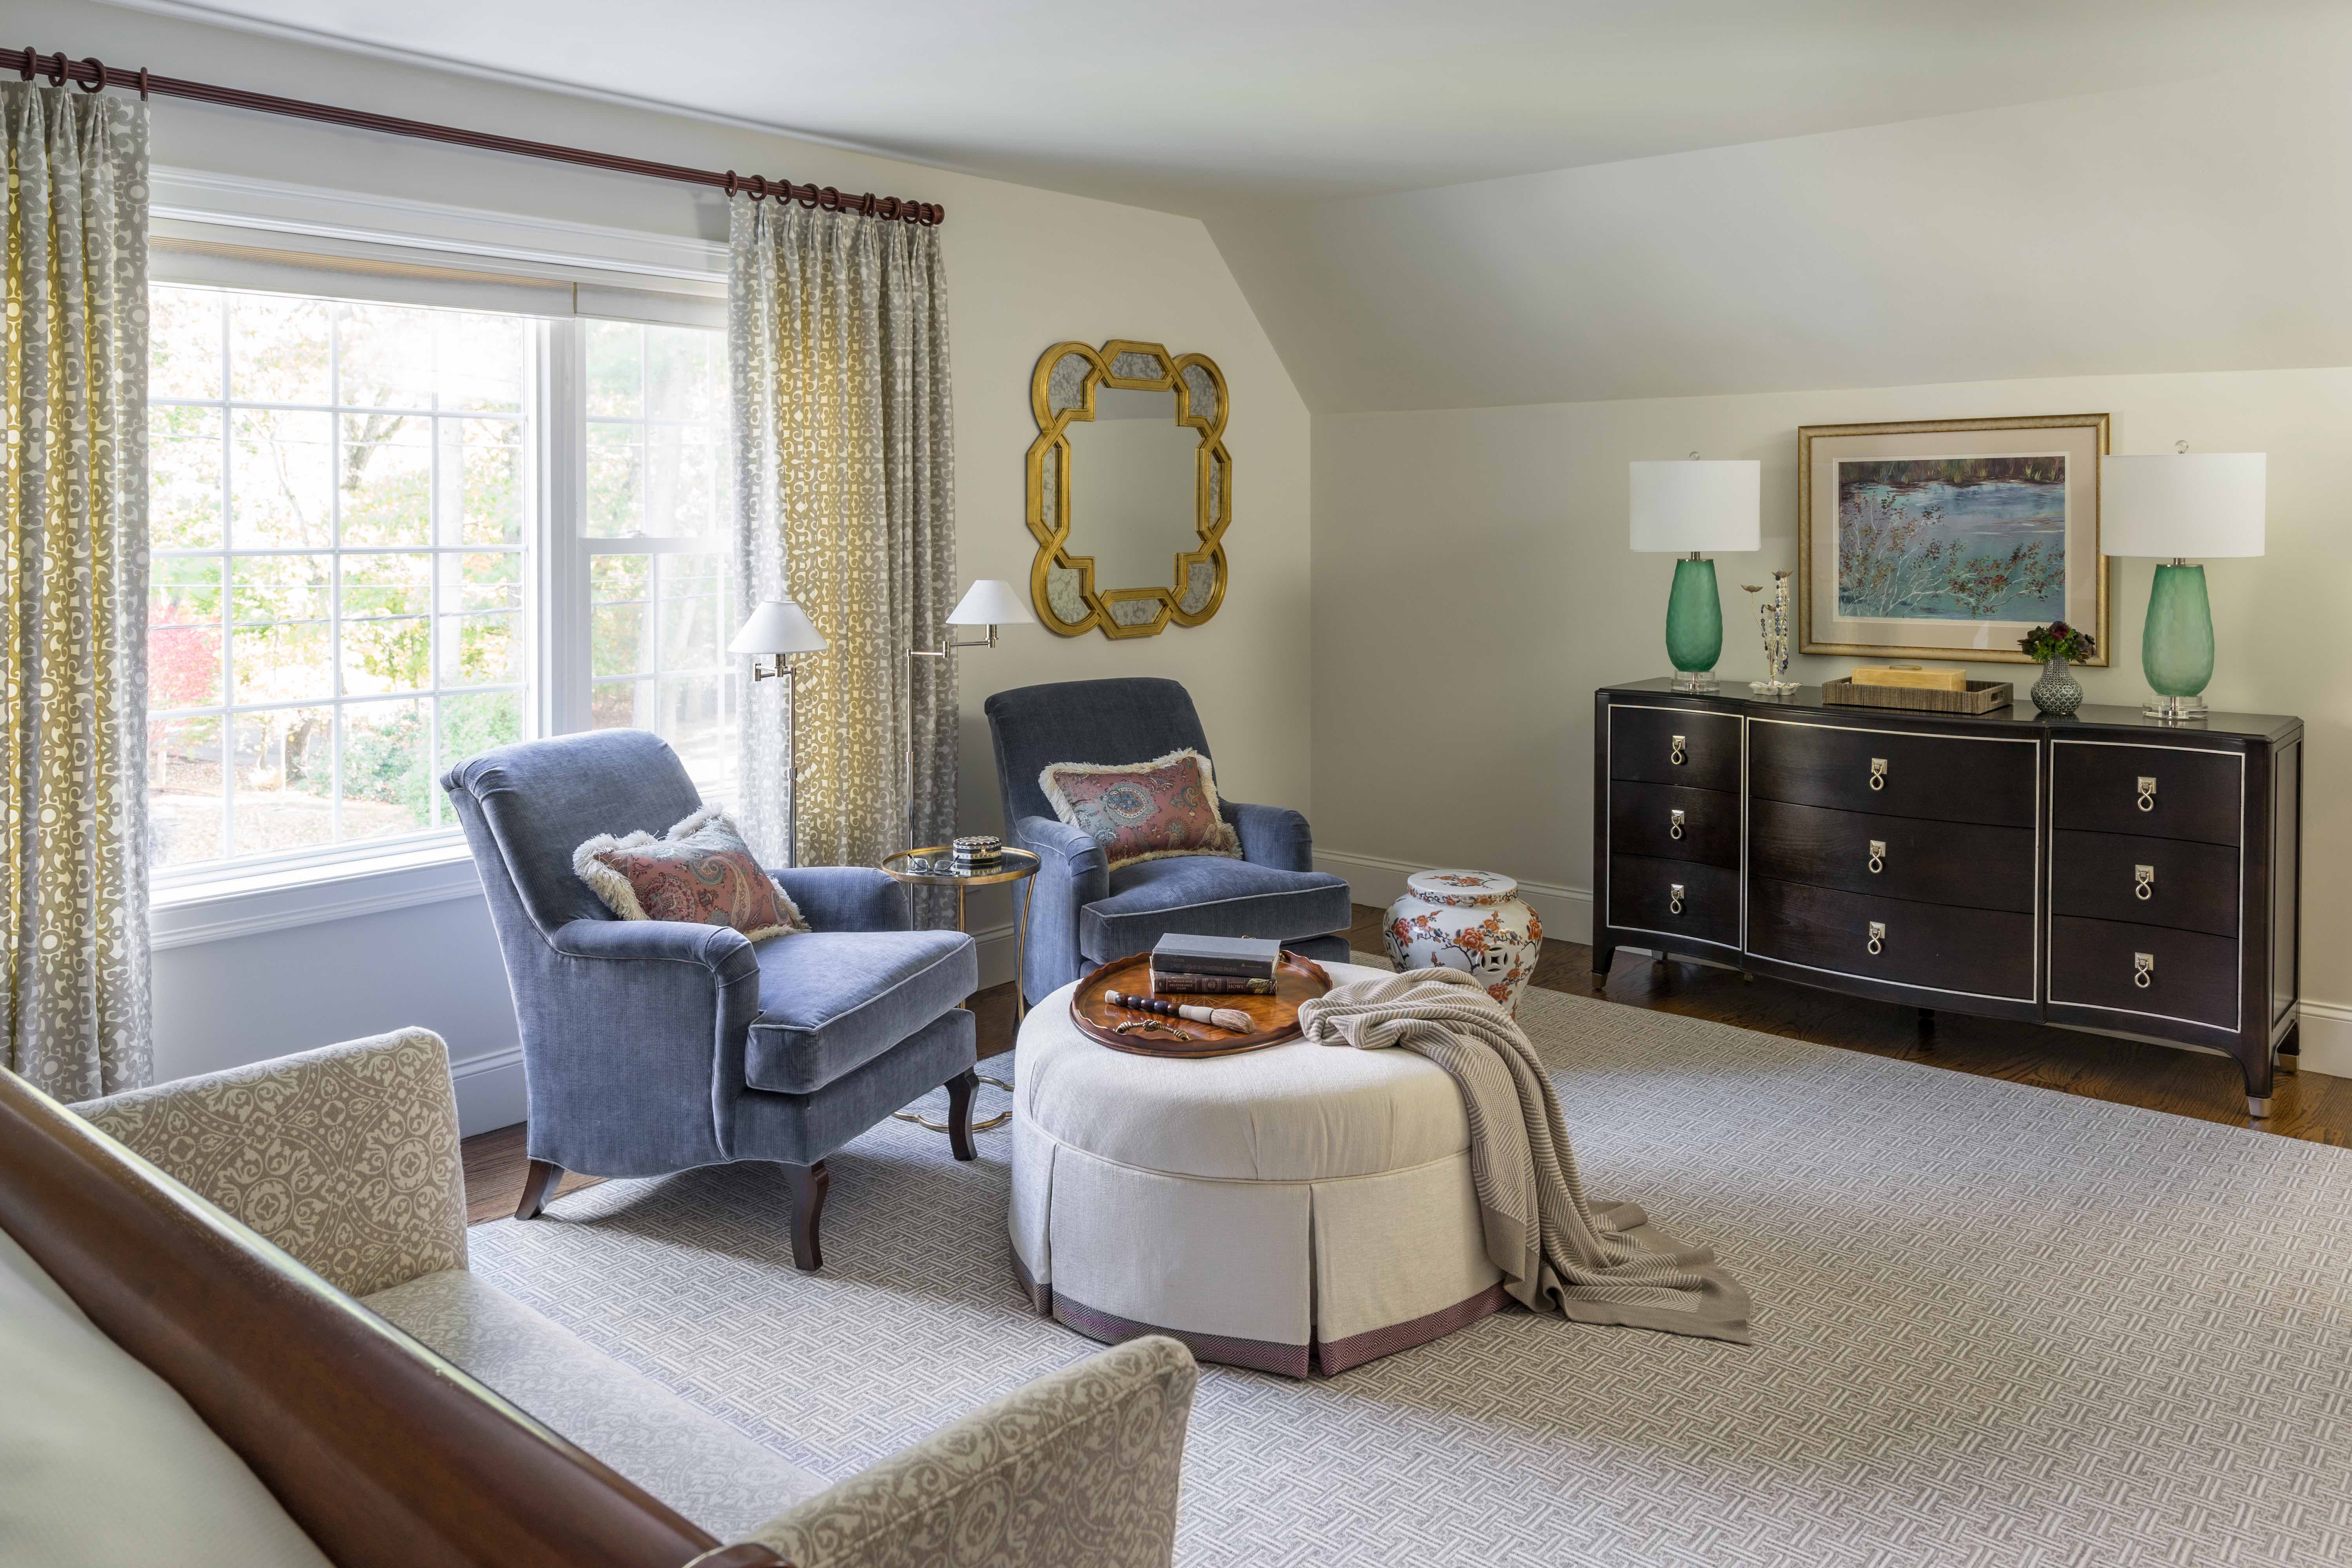 Wellesley Master Bedroom Reveal | Kelly Rogers Interiors | Interiors for Families